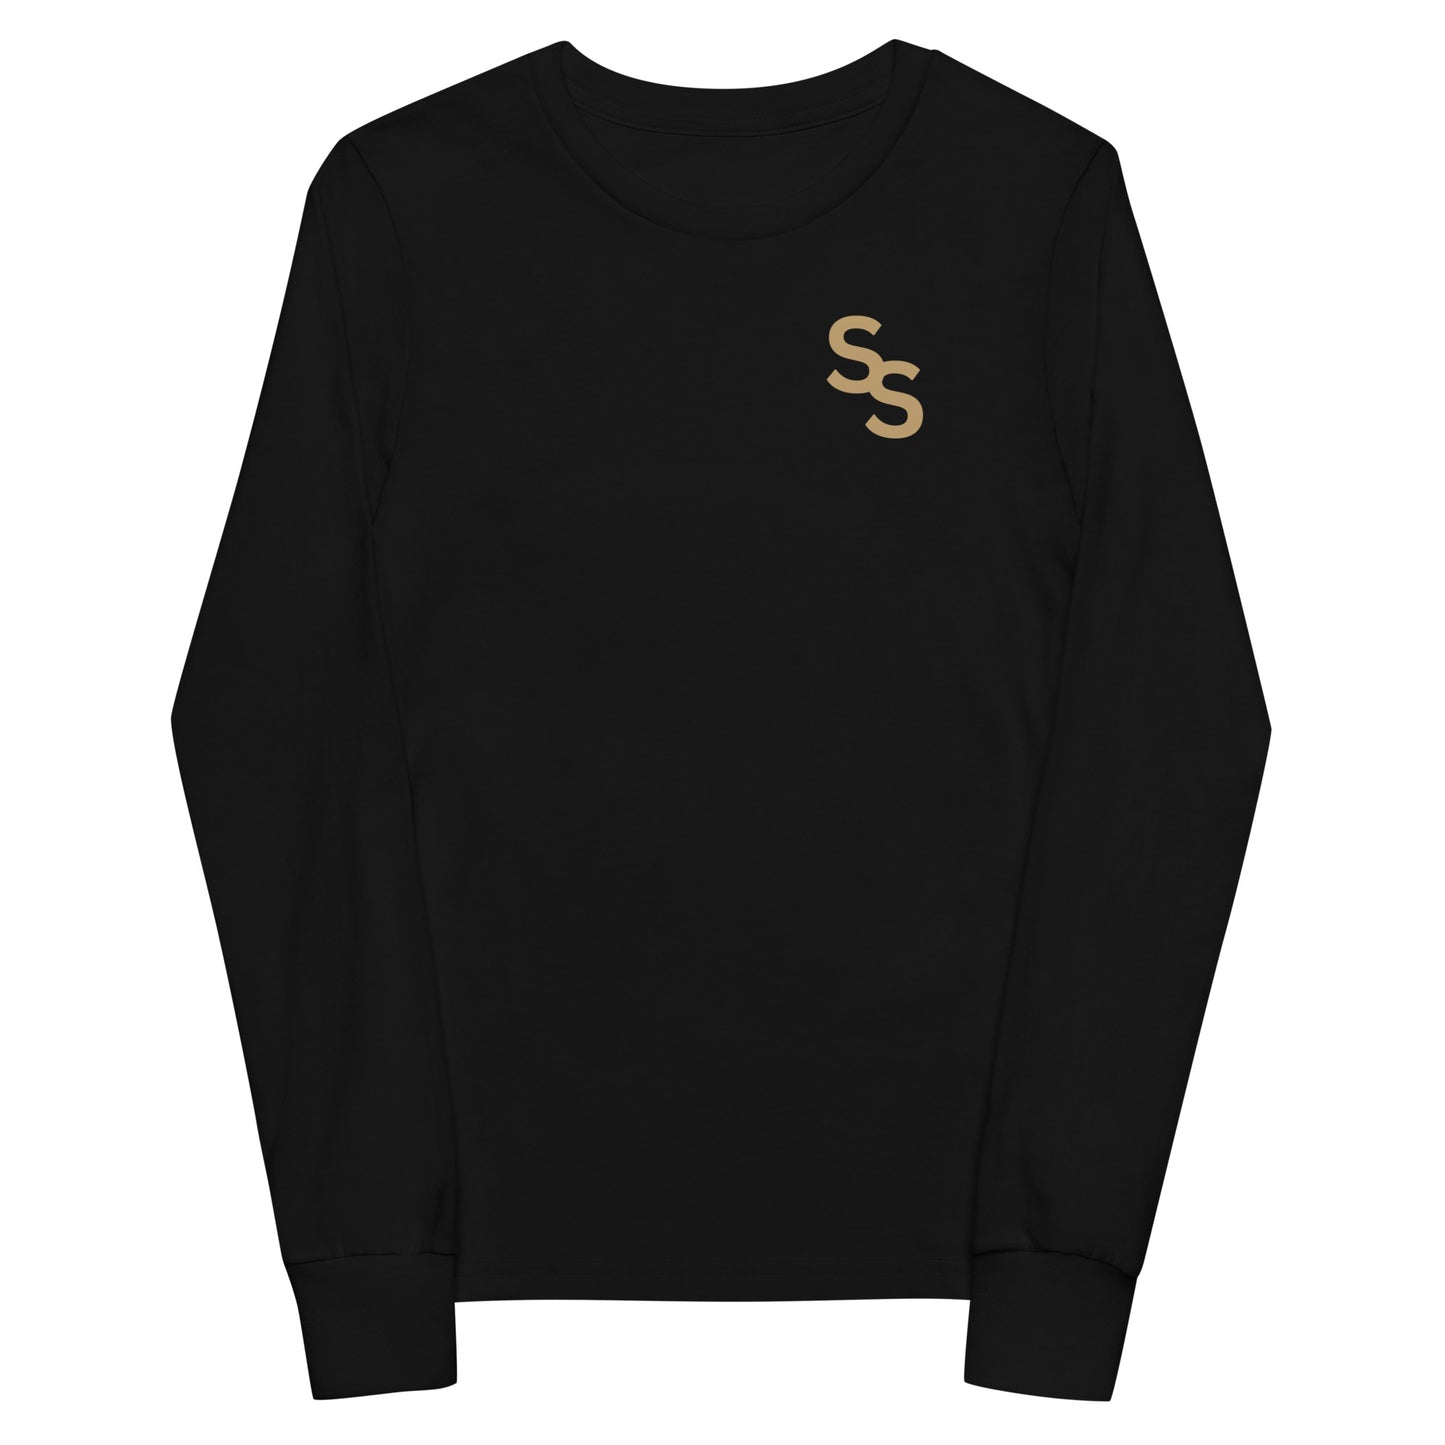 YOUTH LONG SLEEVE- DOUBLE S